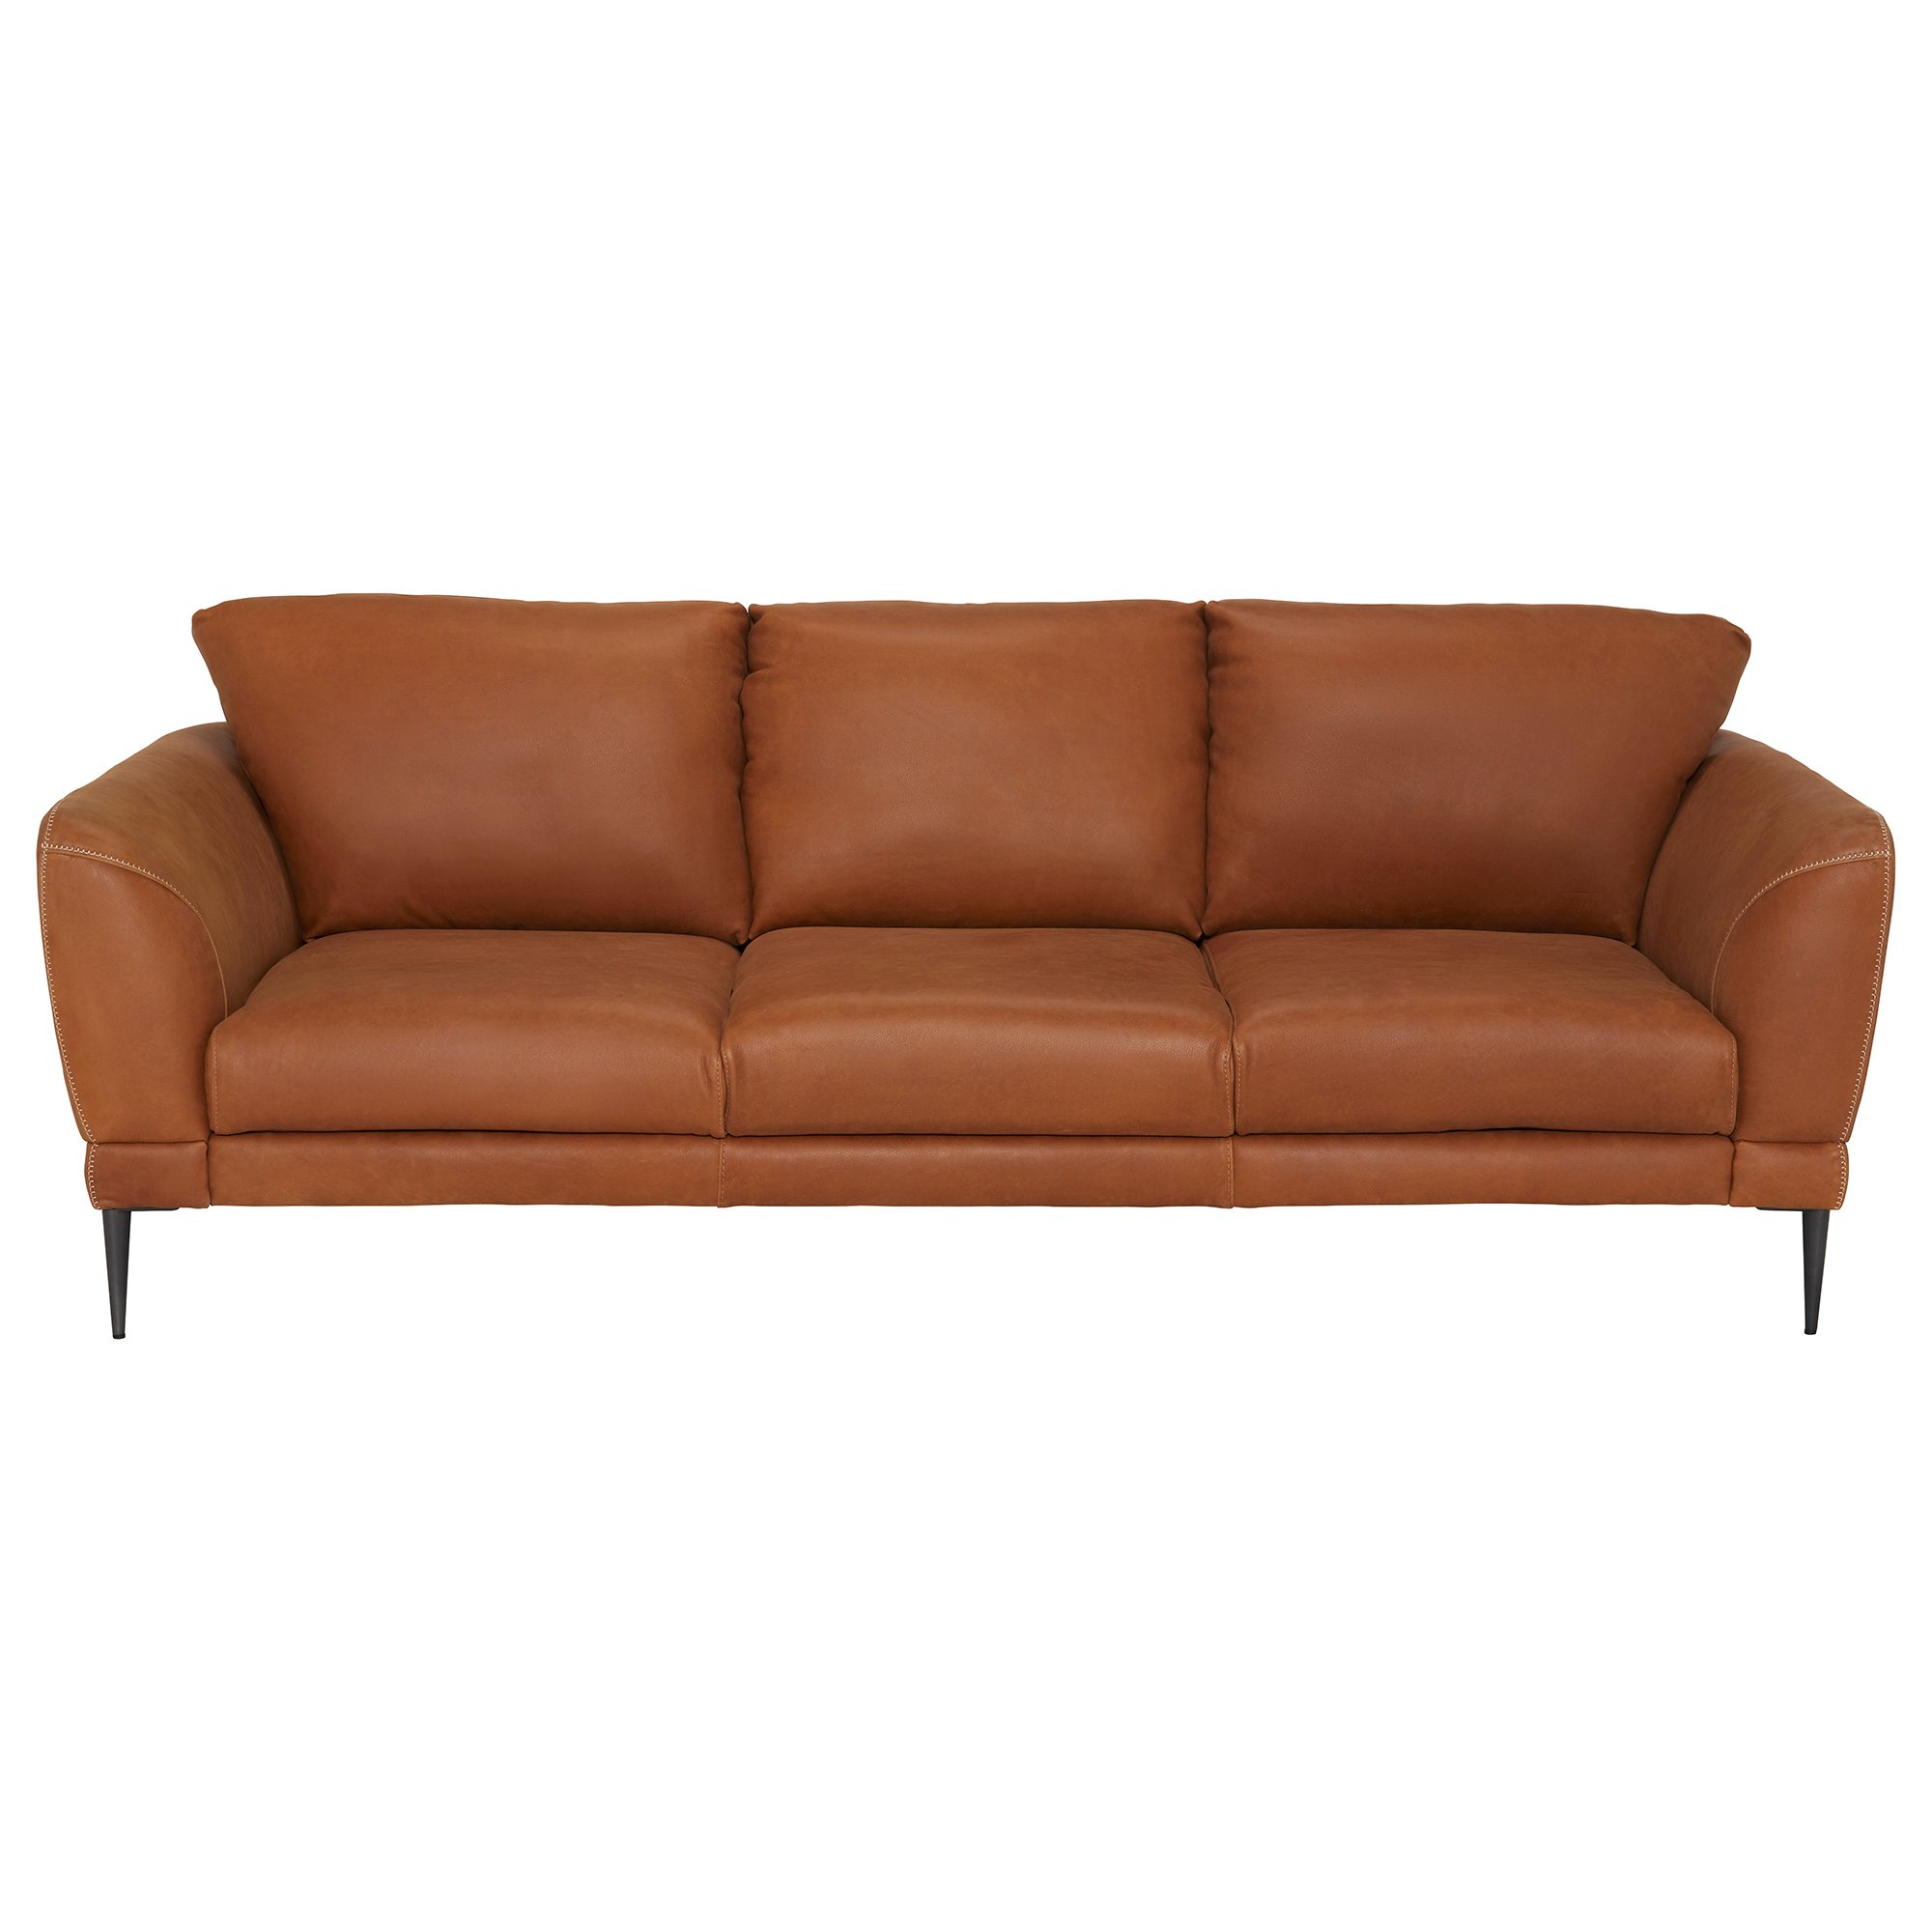 Tennessee 3 Seater Sofa, Brown Leather | Barker & Stonehouse